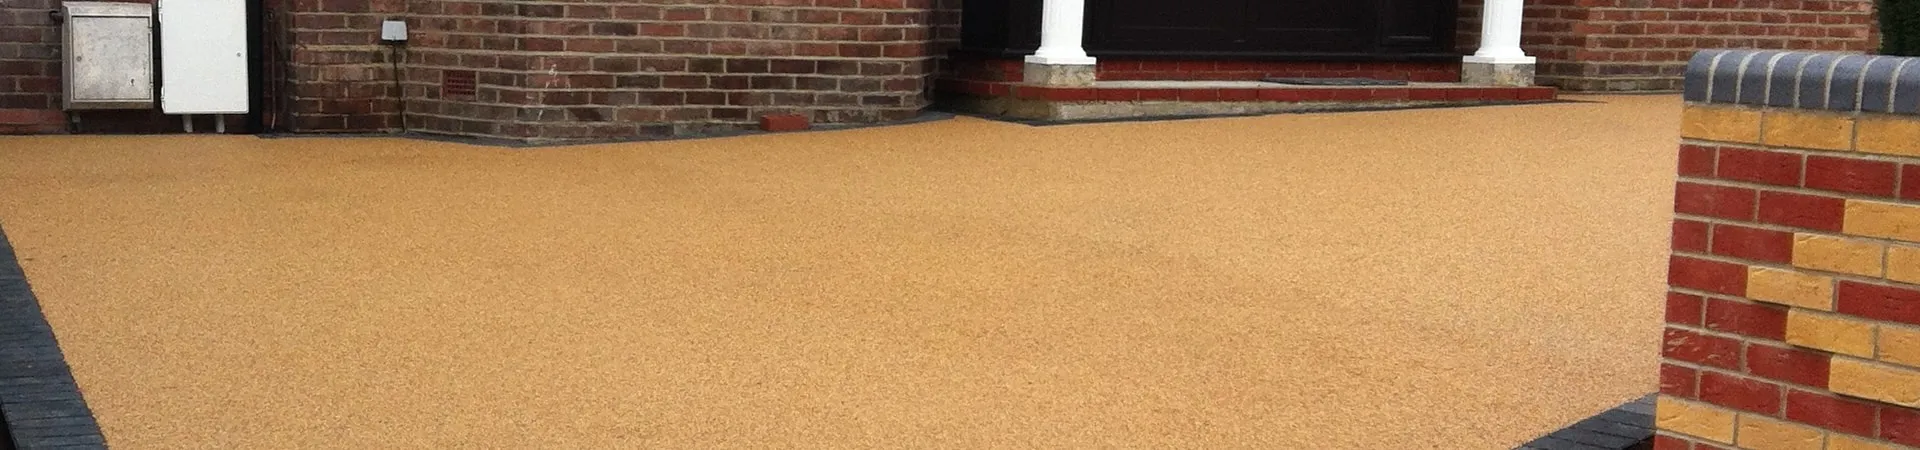 Resin driveways in london and the South East